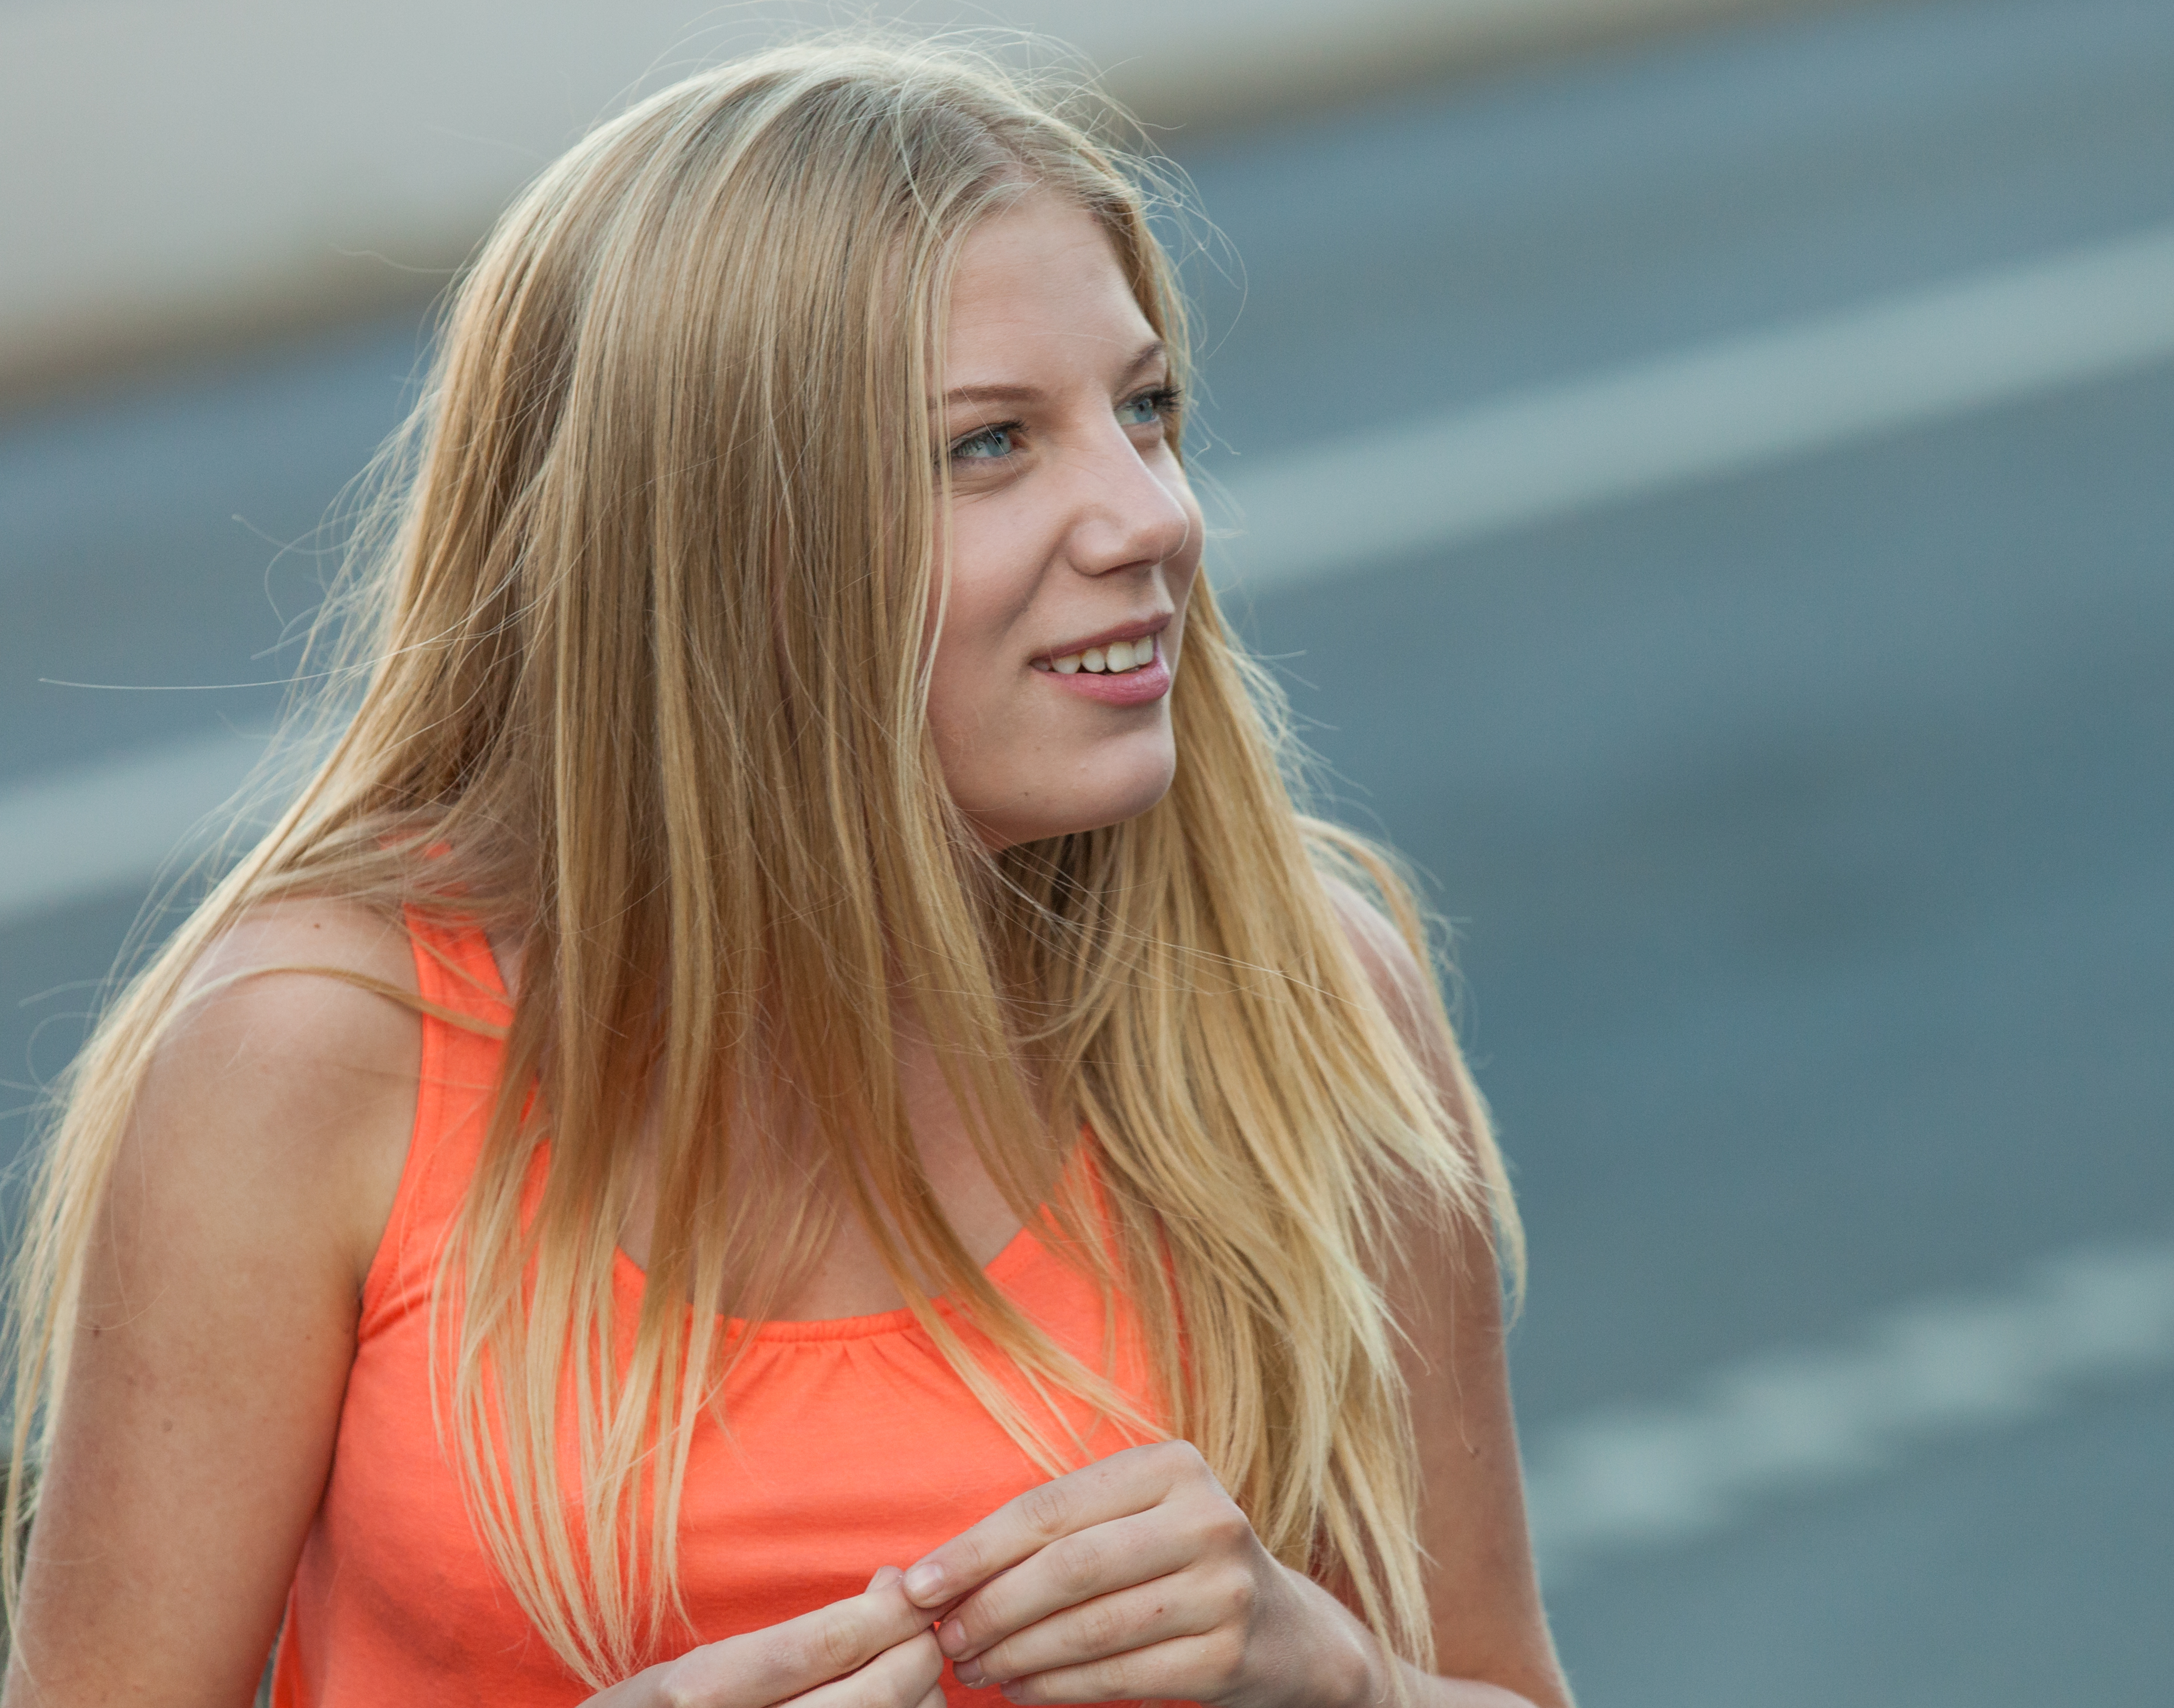 a cute blond girl photographed in Stockholm, Sweden in June 2014, picture 7/26